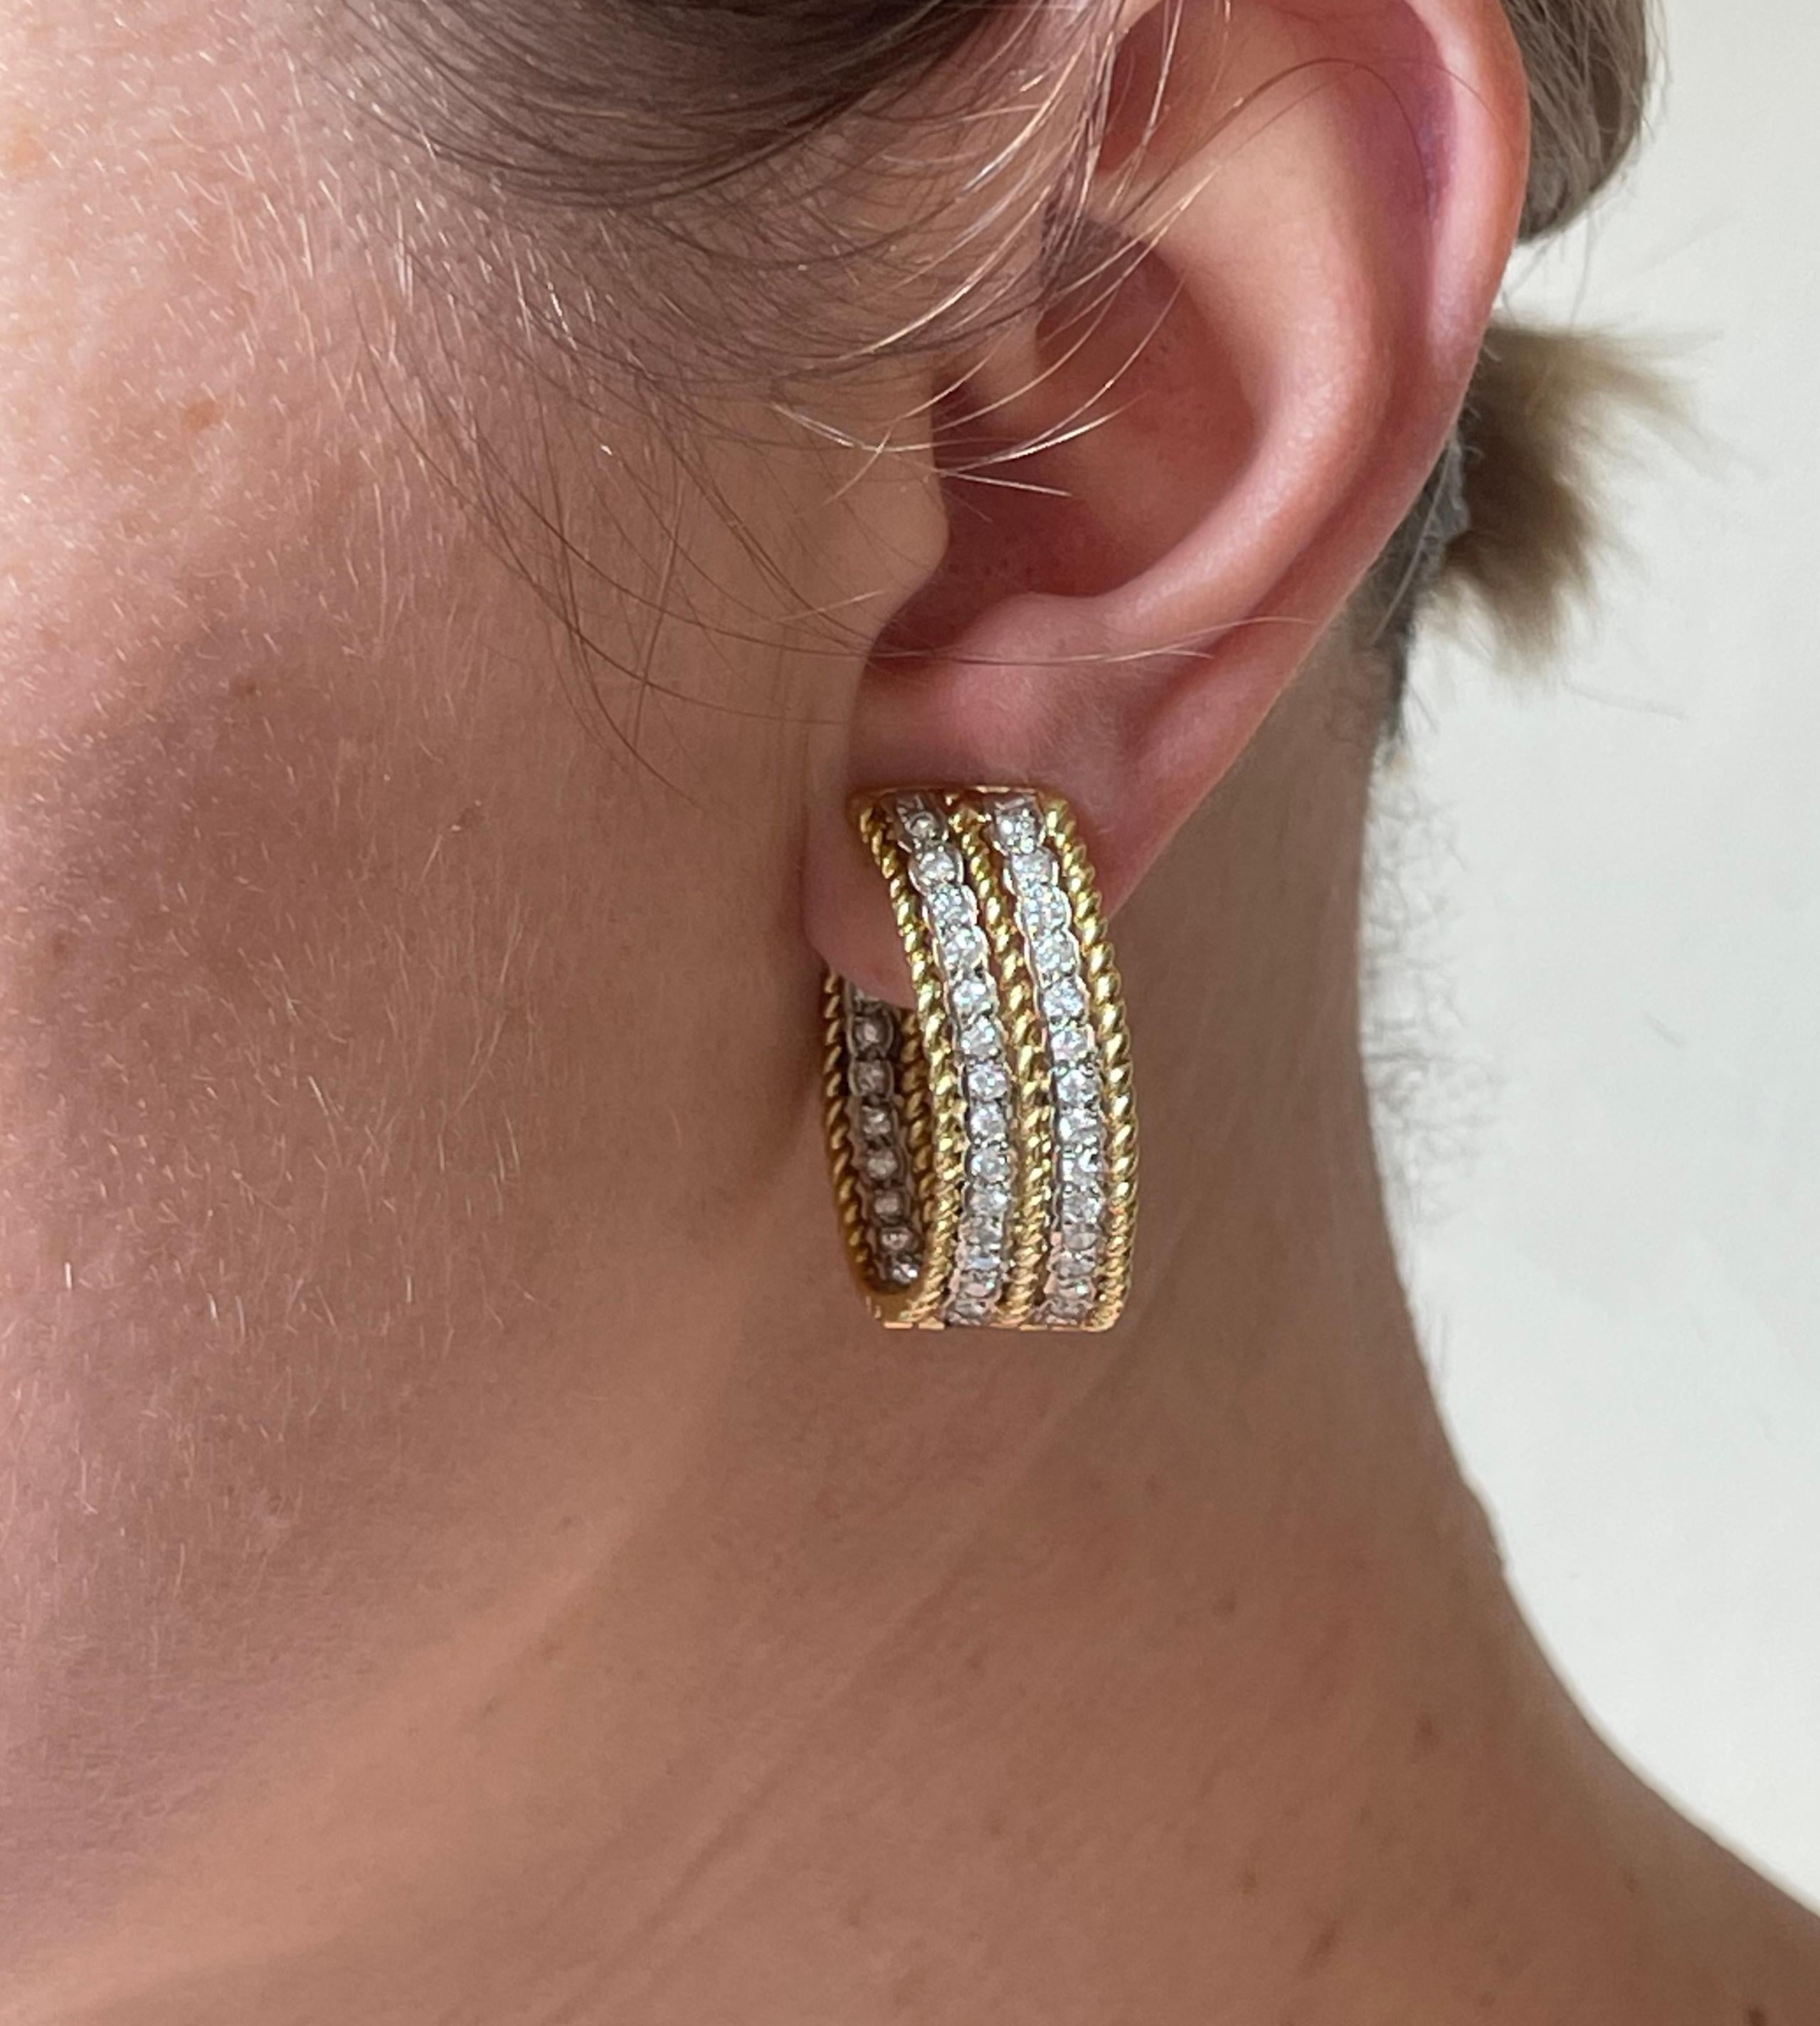 Pair of vintage circa 1960s 18k gold hoop earrings, set with approx. 2.24ctw H/SI diamonds. Earrings do not have posts. Hallmarked with 18k stamp. Earrings measure 1.25